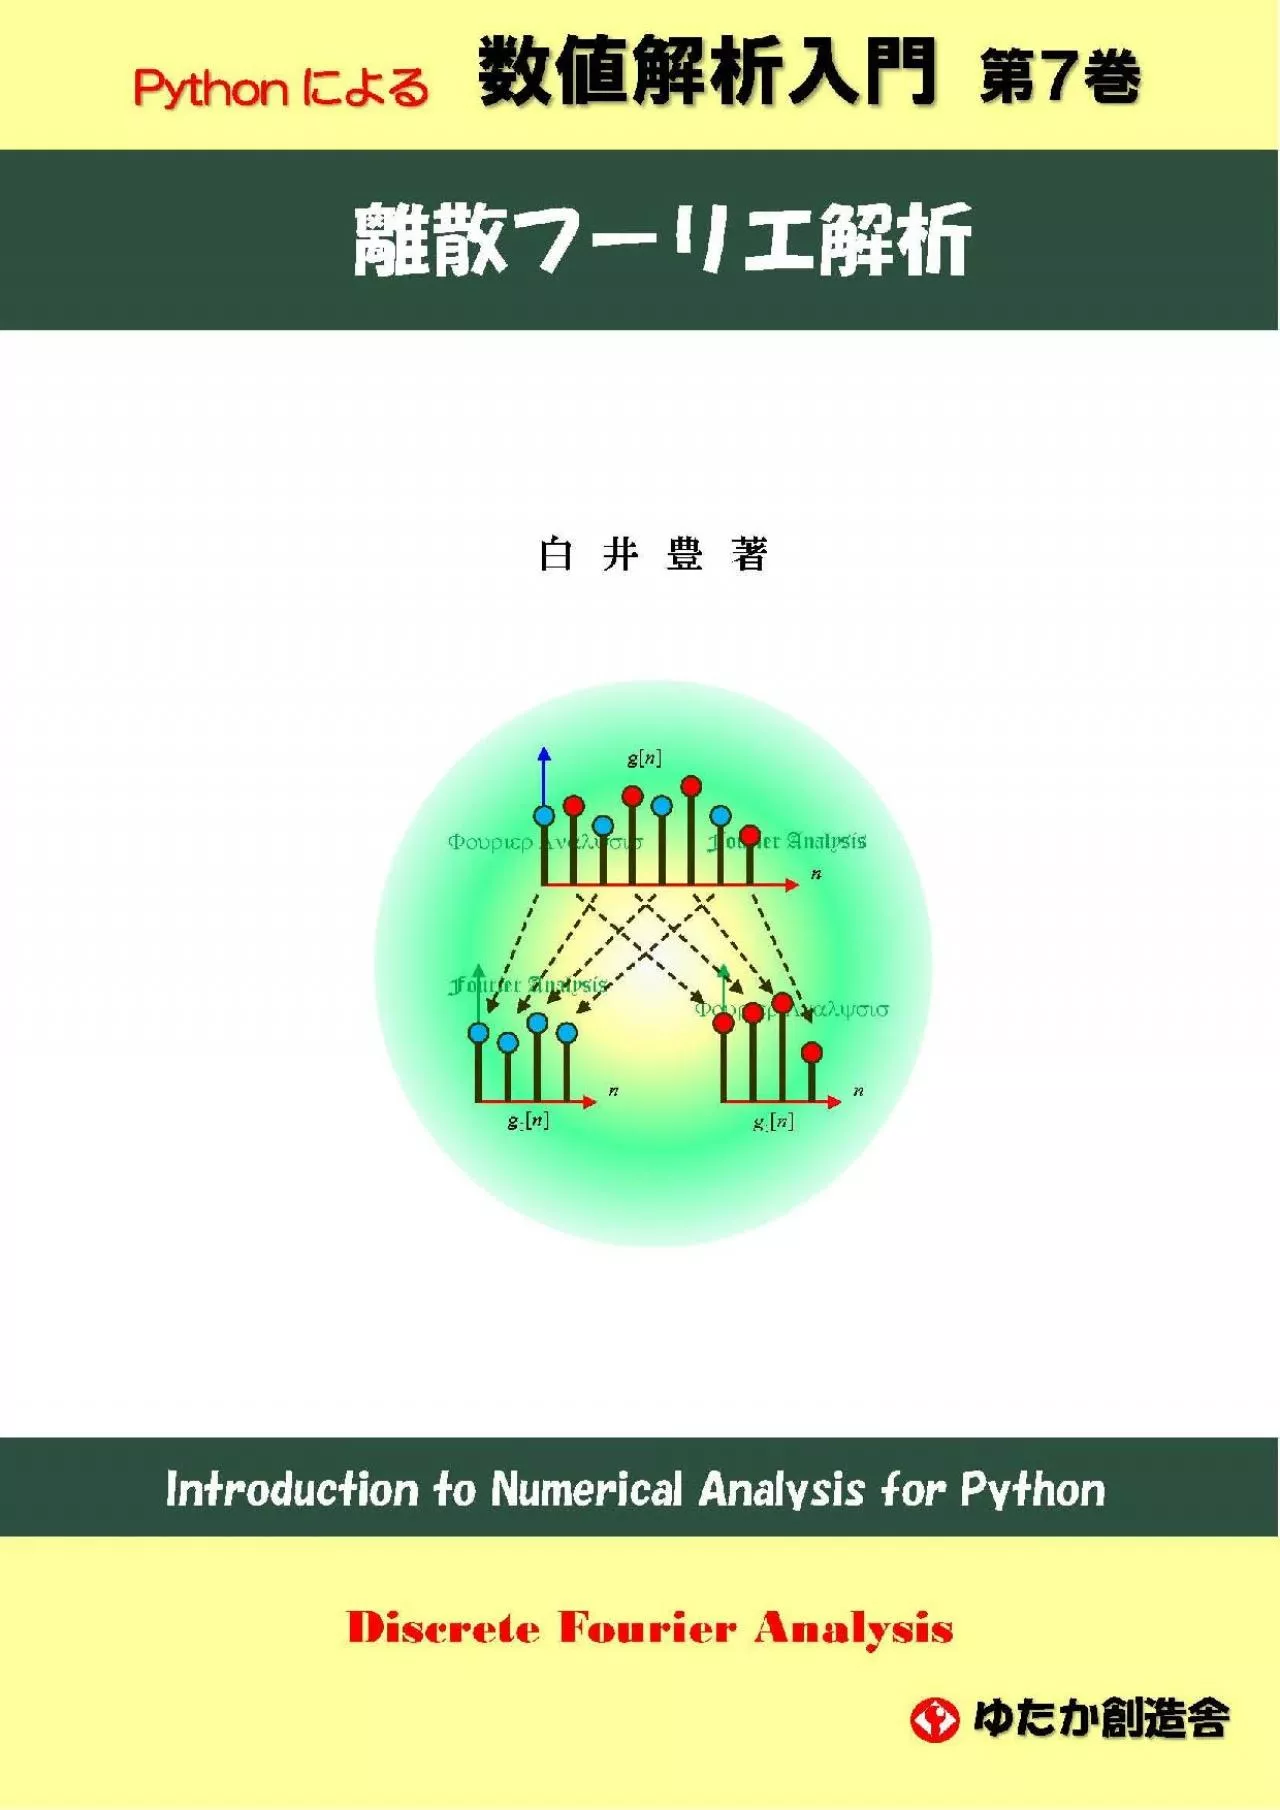 [BEST]-Introduction to Numerical Analysis for Python No7 Discrete Fourier Analysis (Japanese